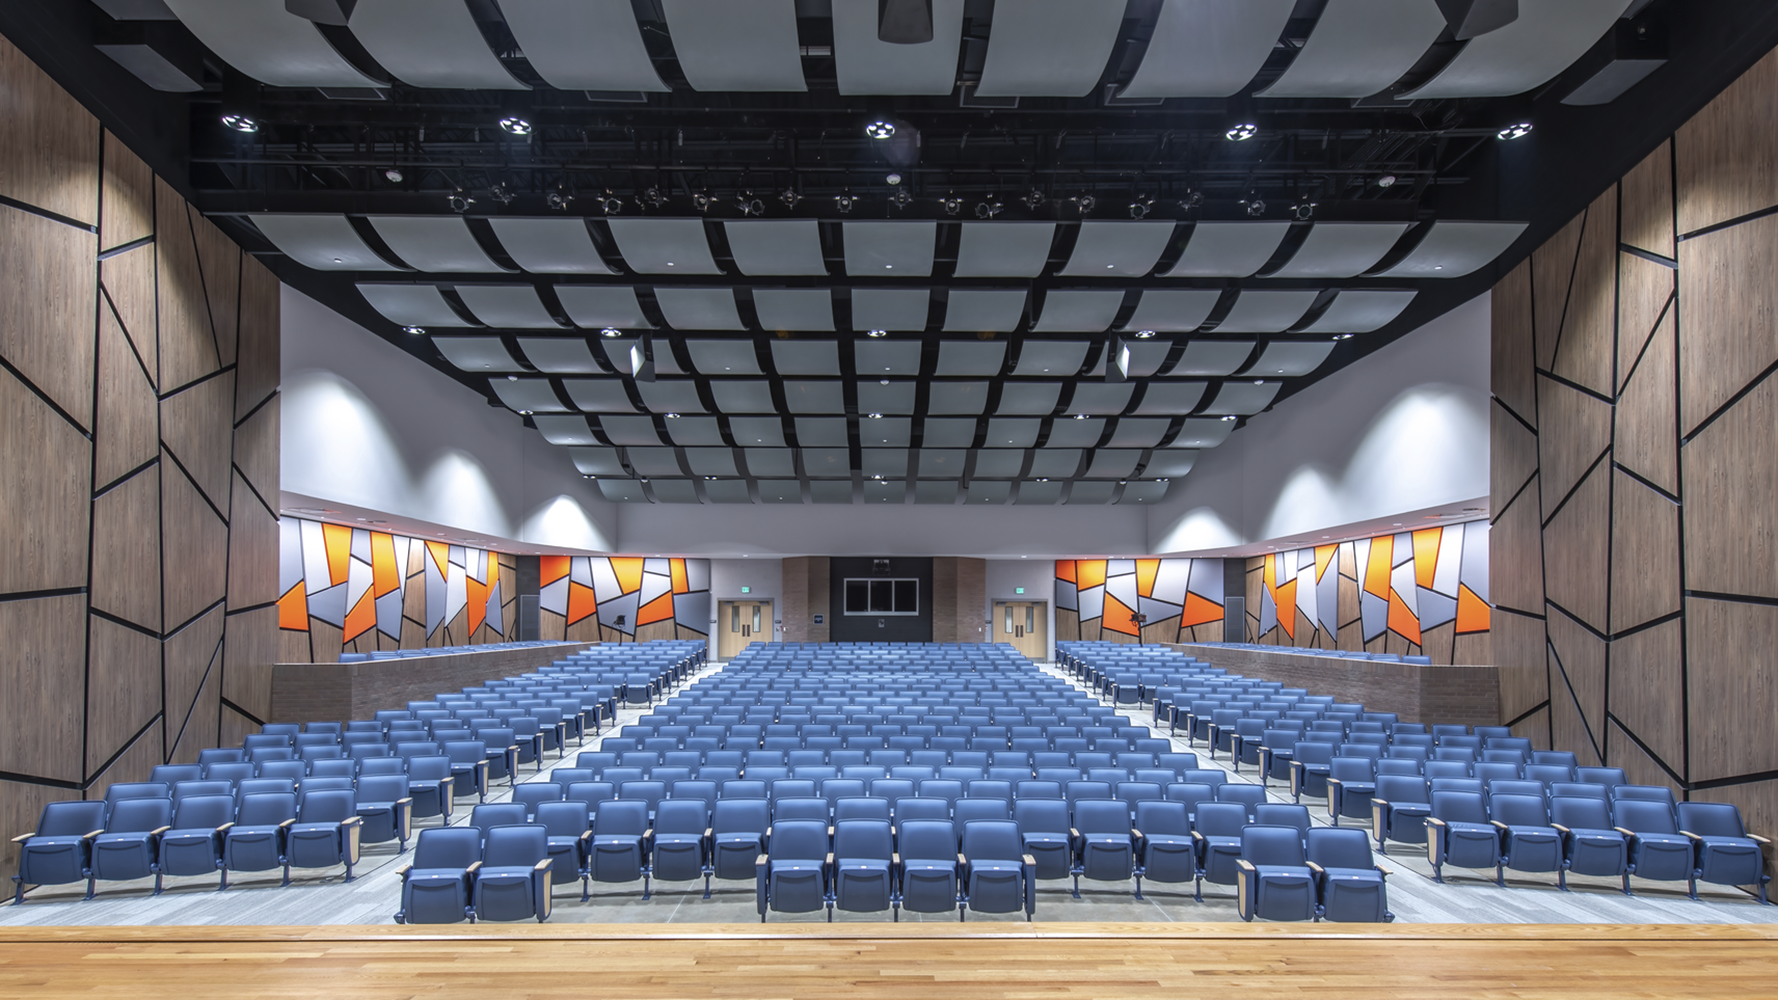 Auditorium with blue chairs, brown and orange walls, gray ceiling